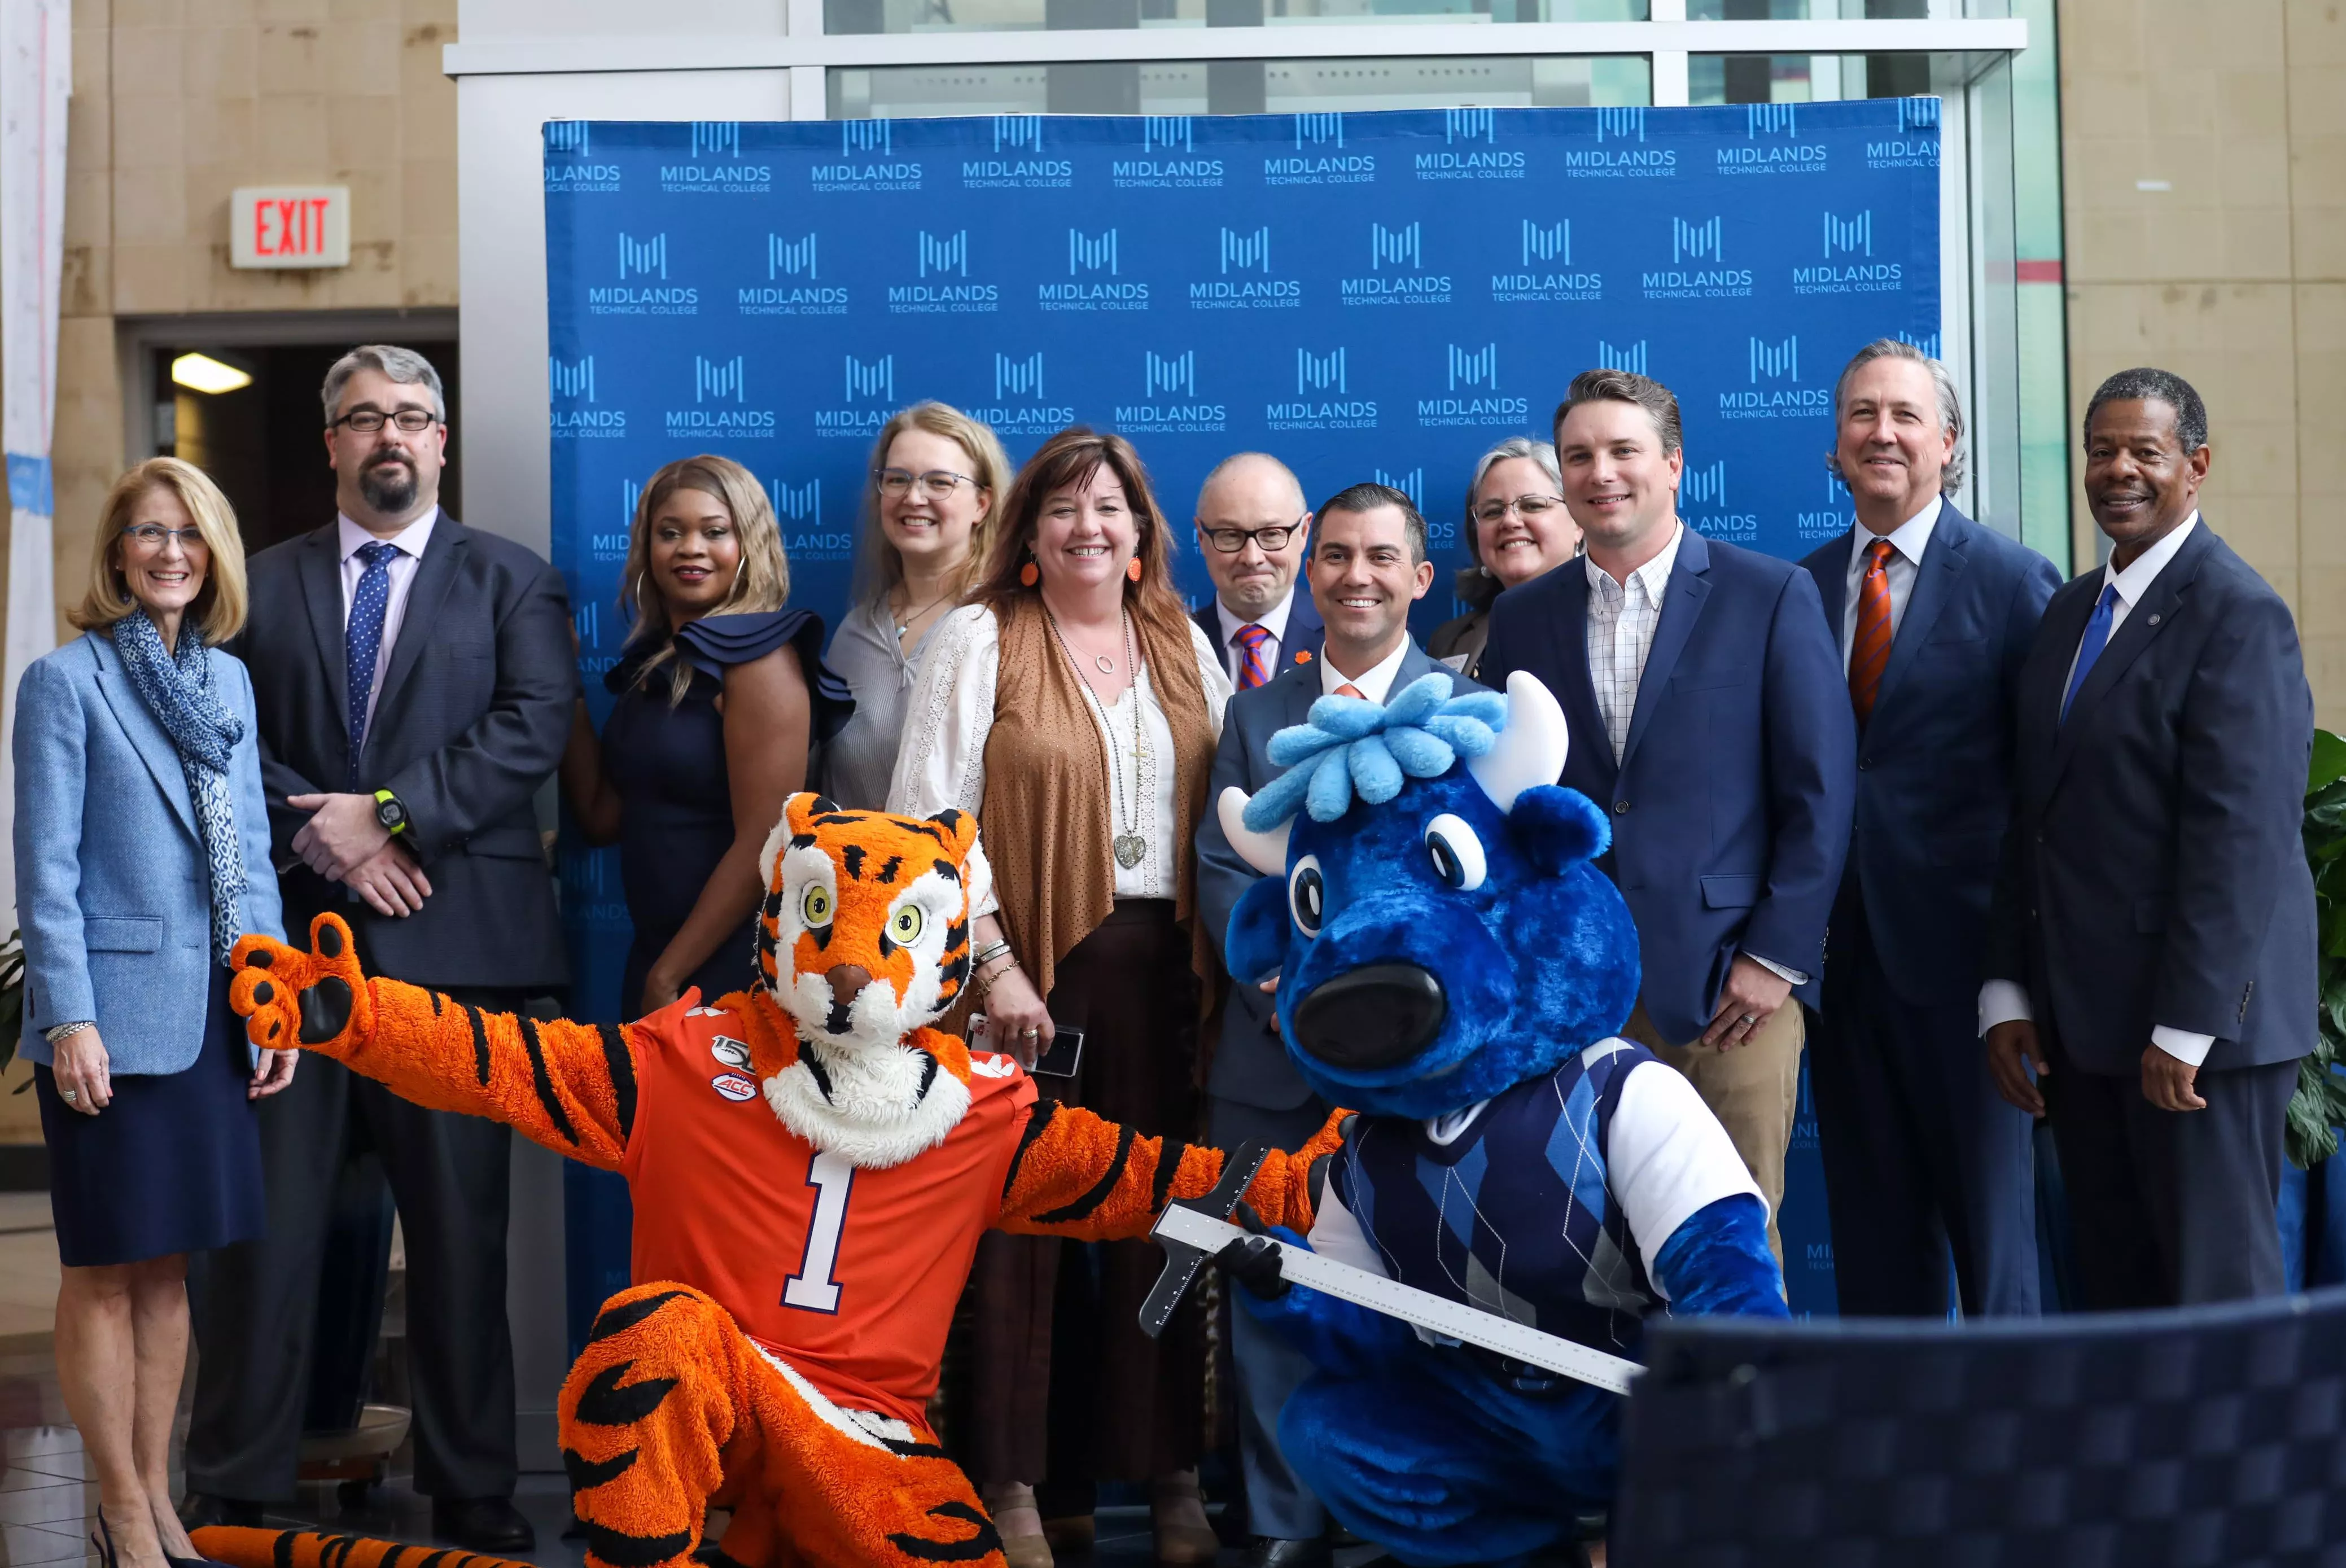 MTC and Clemson officials smiling together with the Clemson and MTC Mascot posing in front